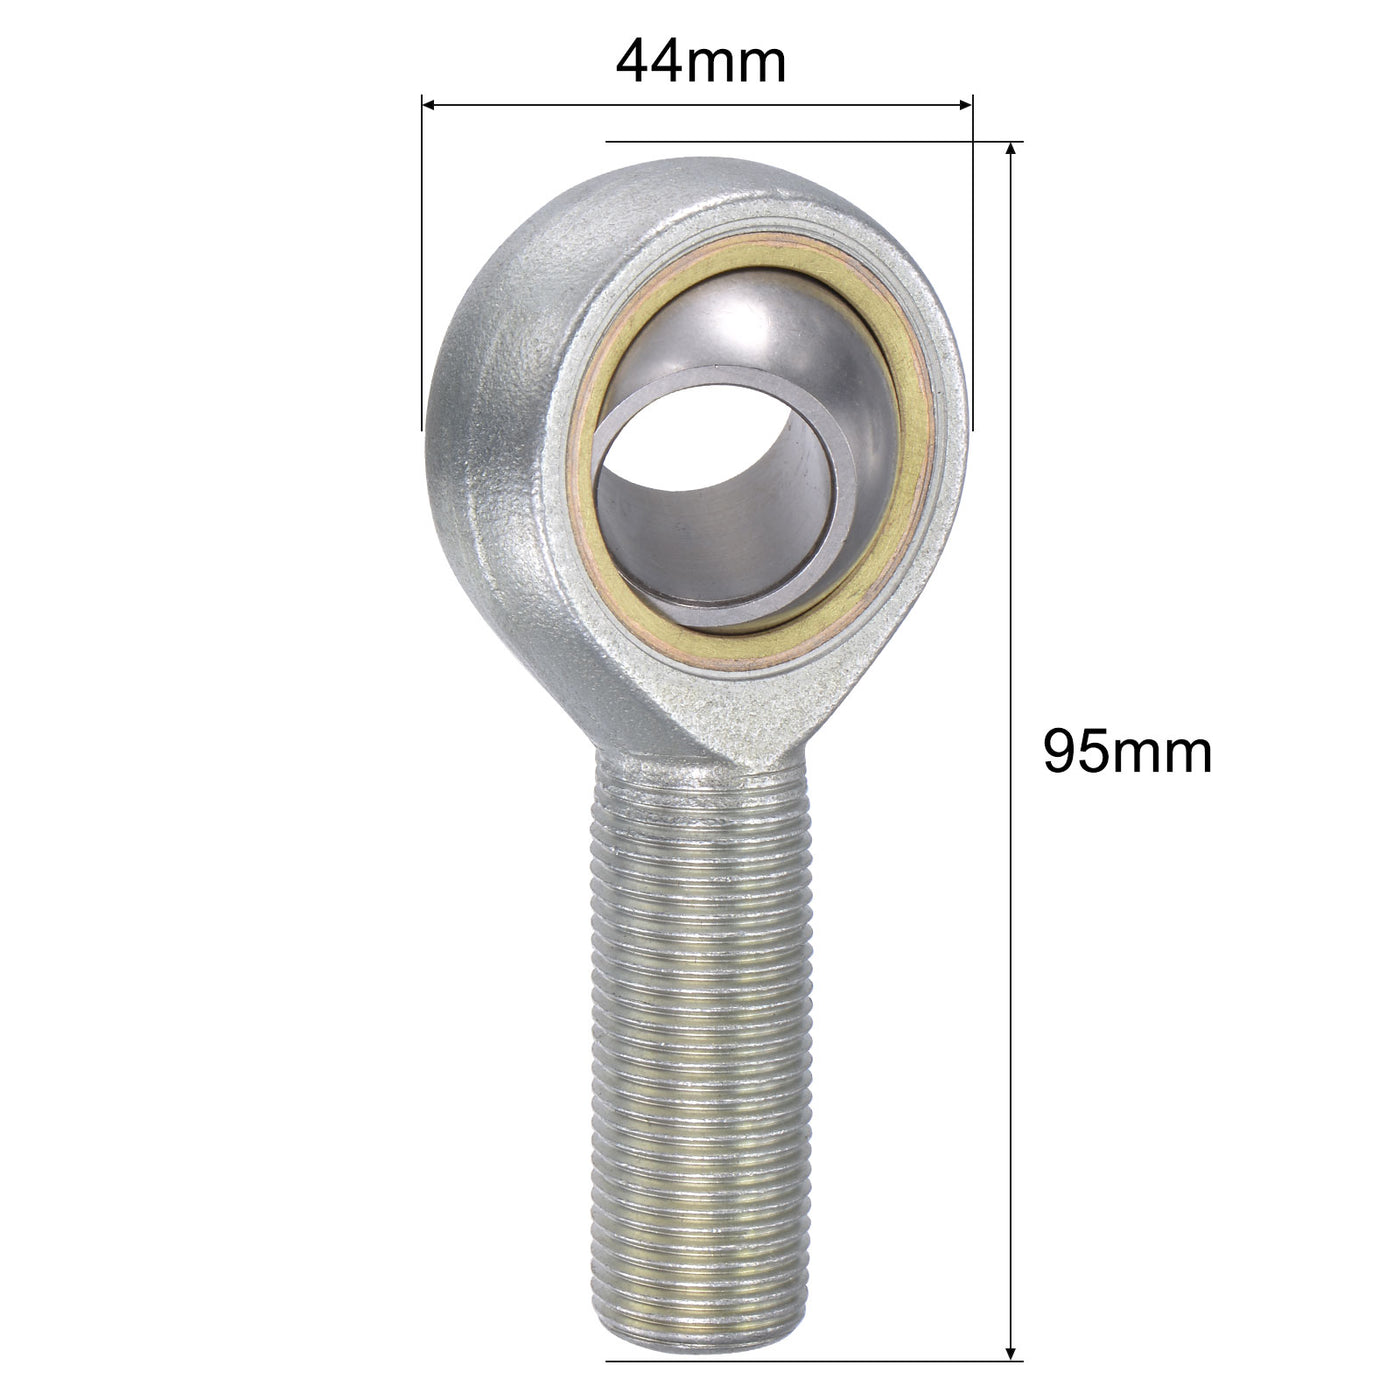 uxcell Uxcell SA18TK POSA18 Rod End Bearing 18mm Bore M18x1.5 Left Hand Male Thread